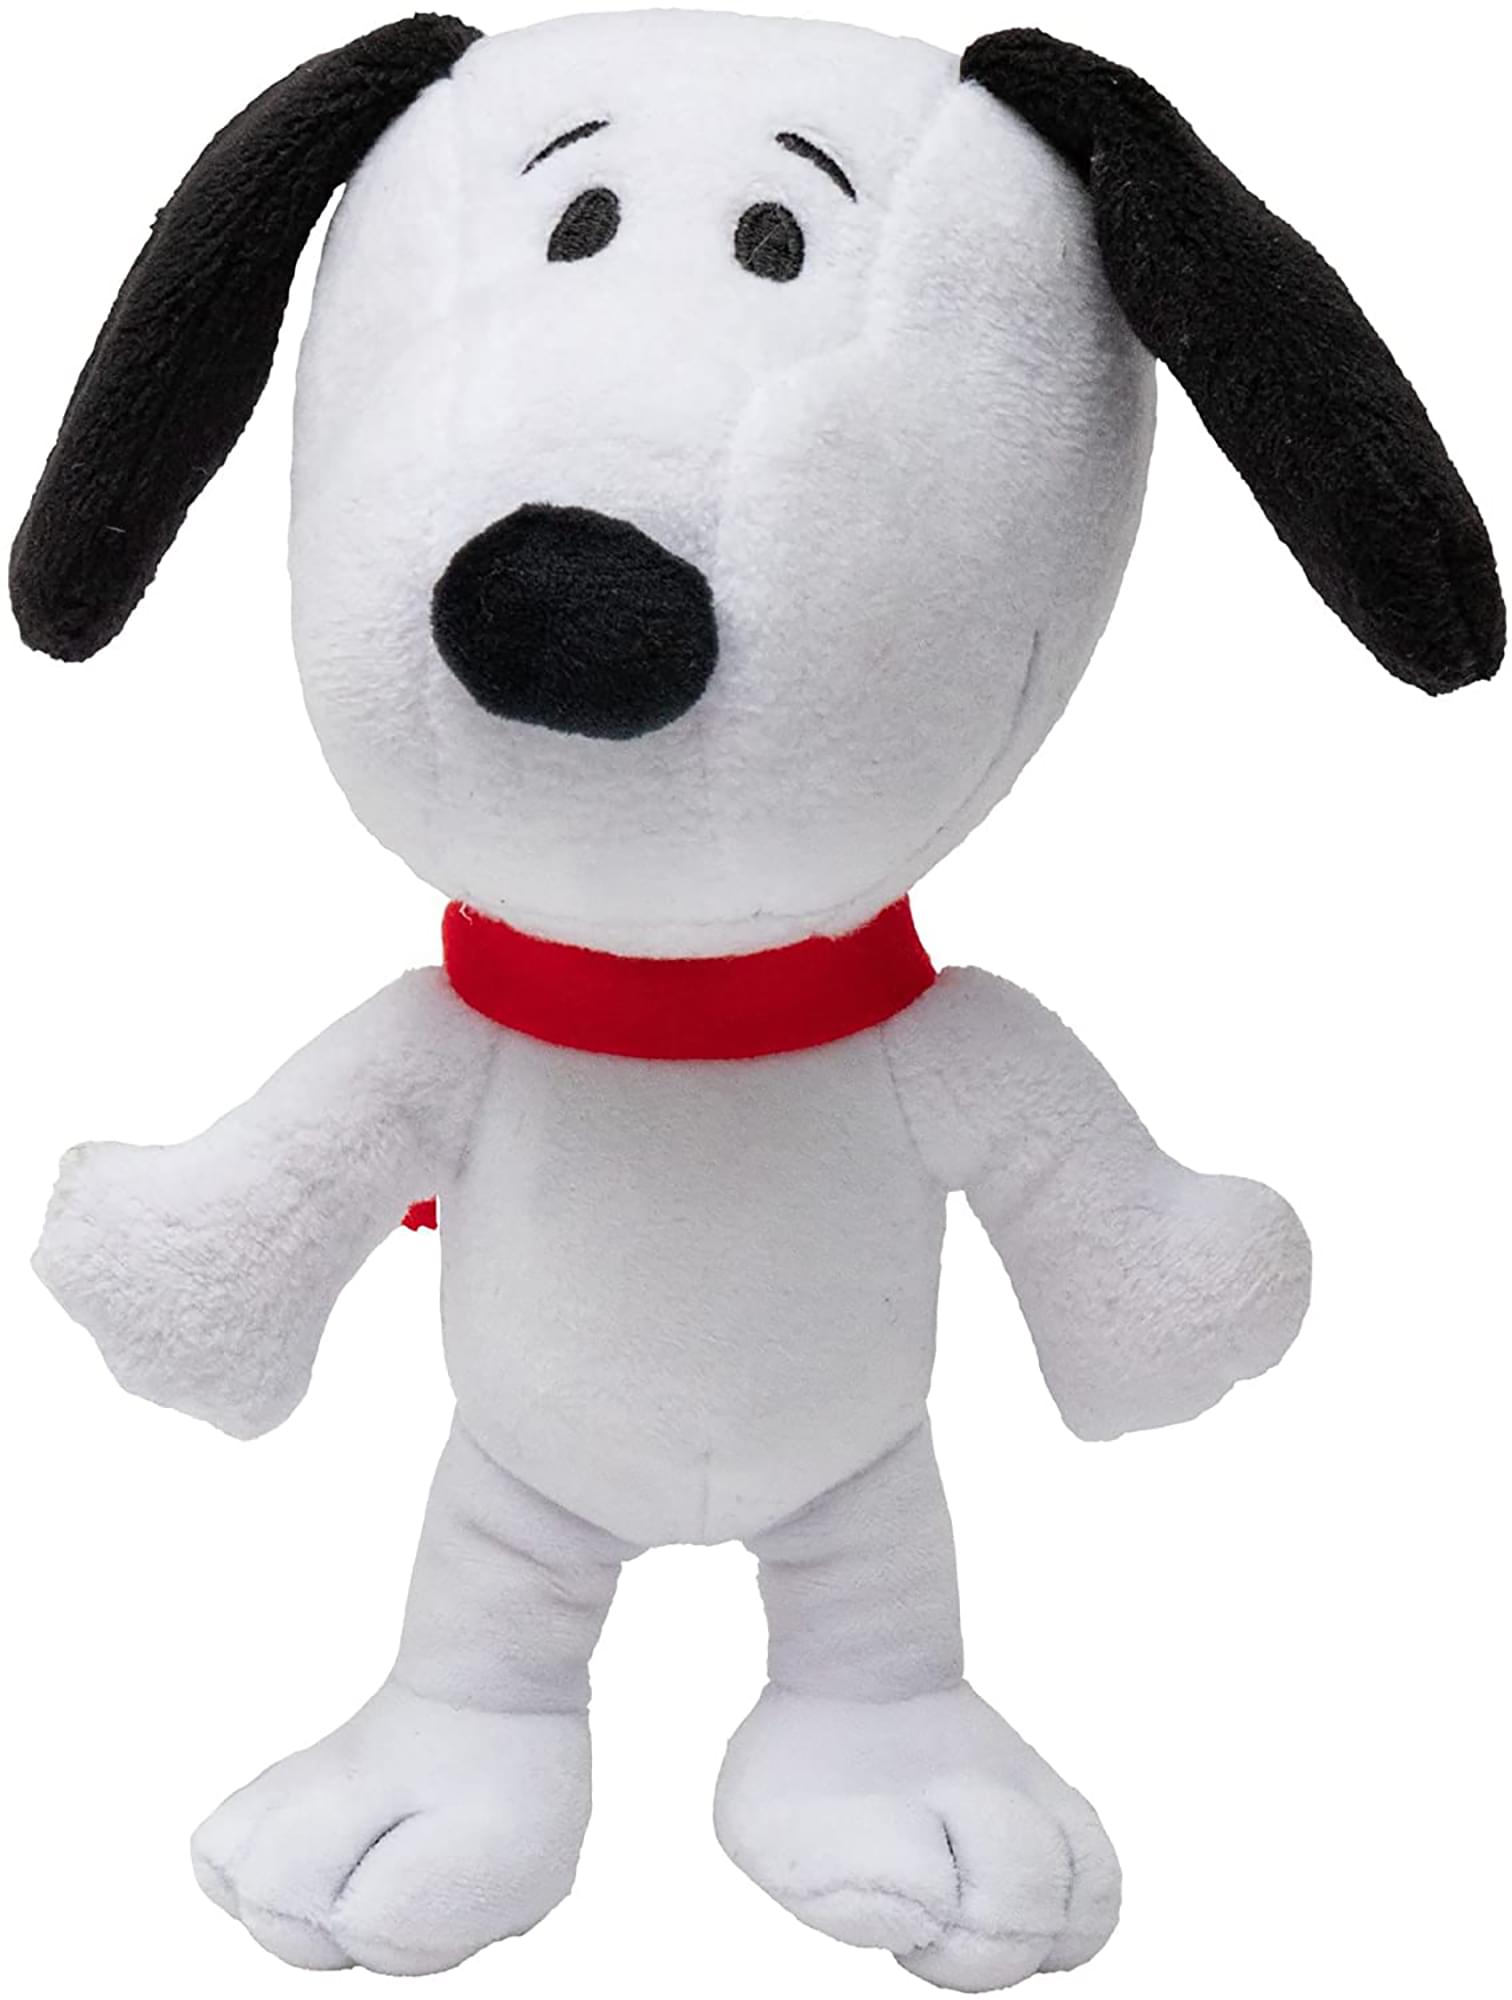 The Snoopy Show 7.5 Inch Plush | Snoopy